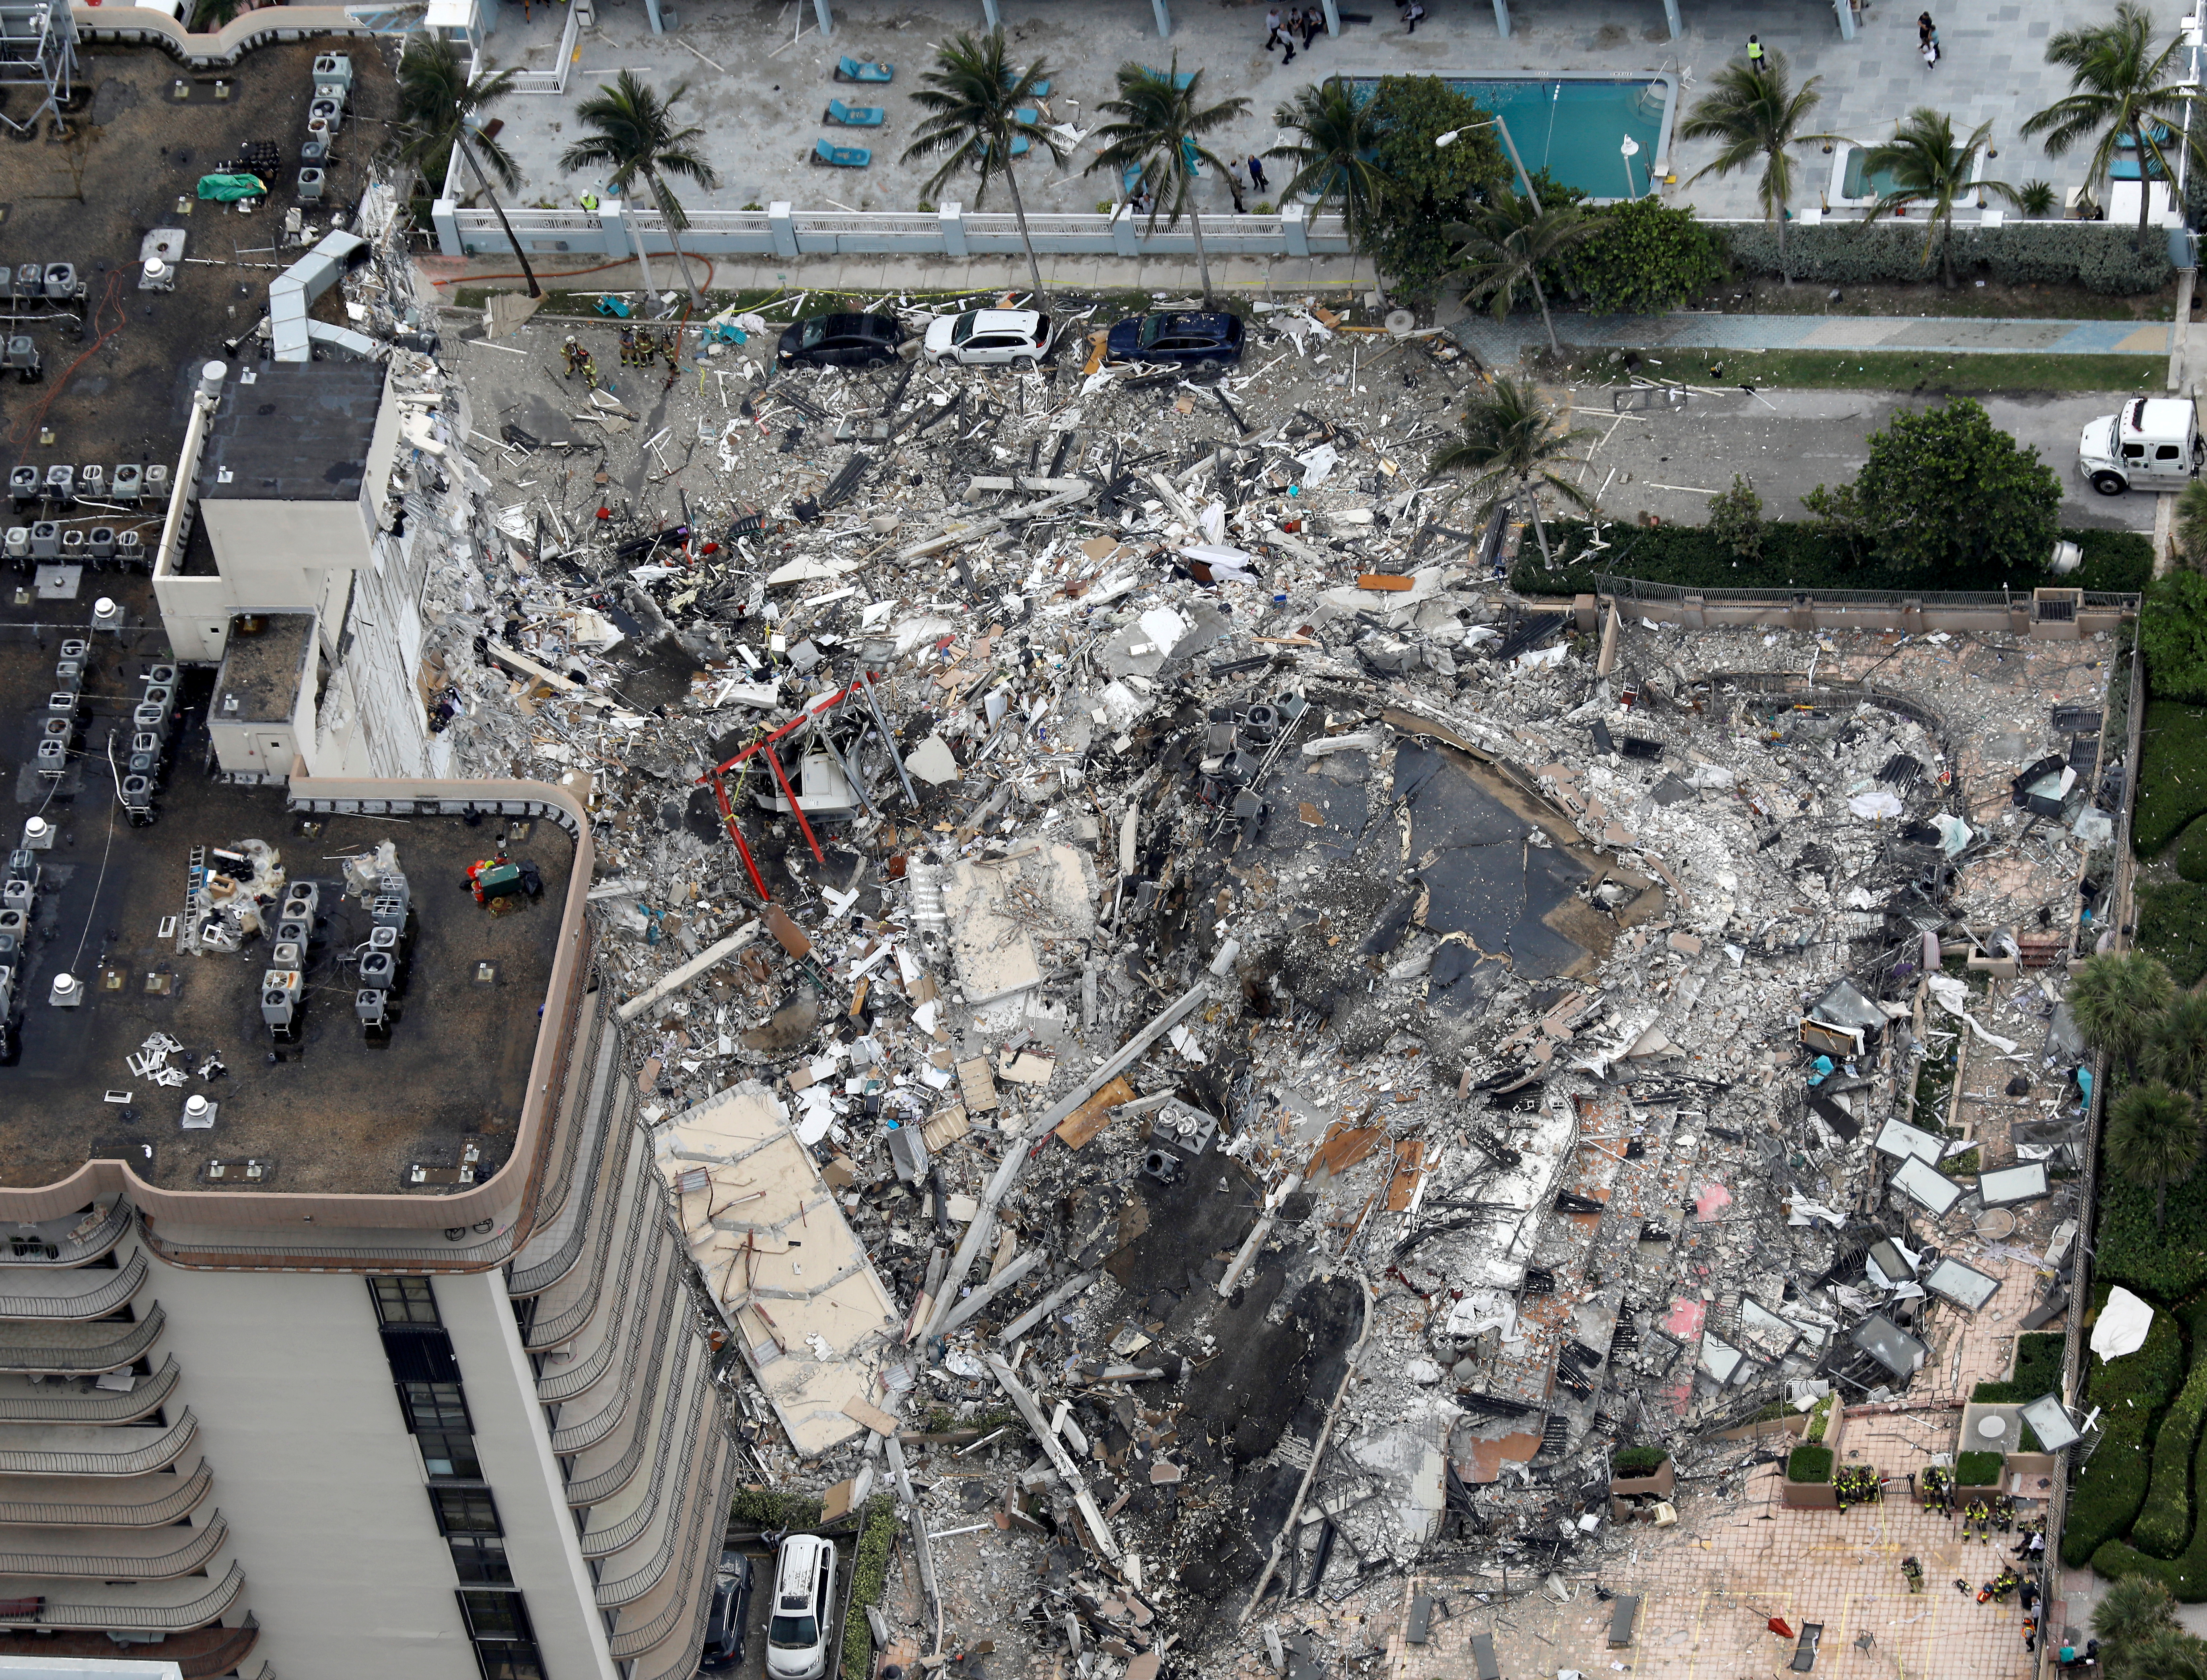 An aerial view showing a partially collapsed building in Surfside near Miami Beach